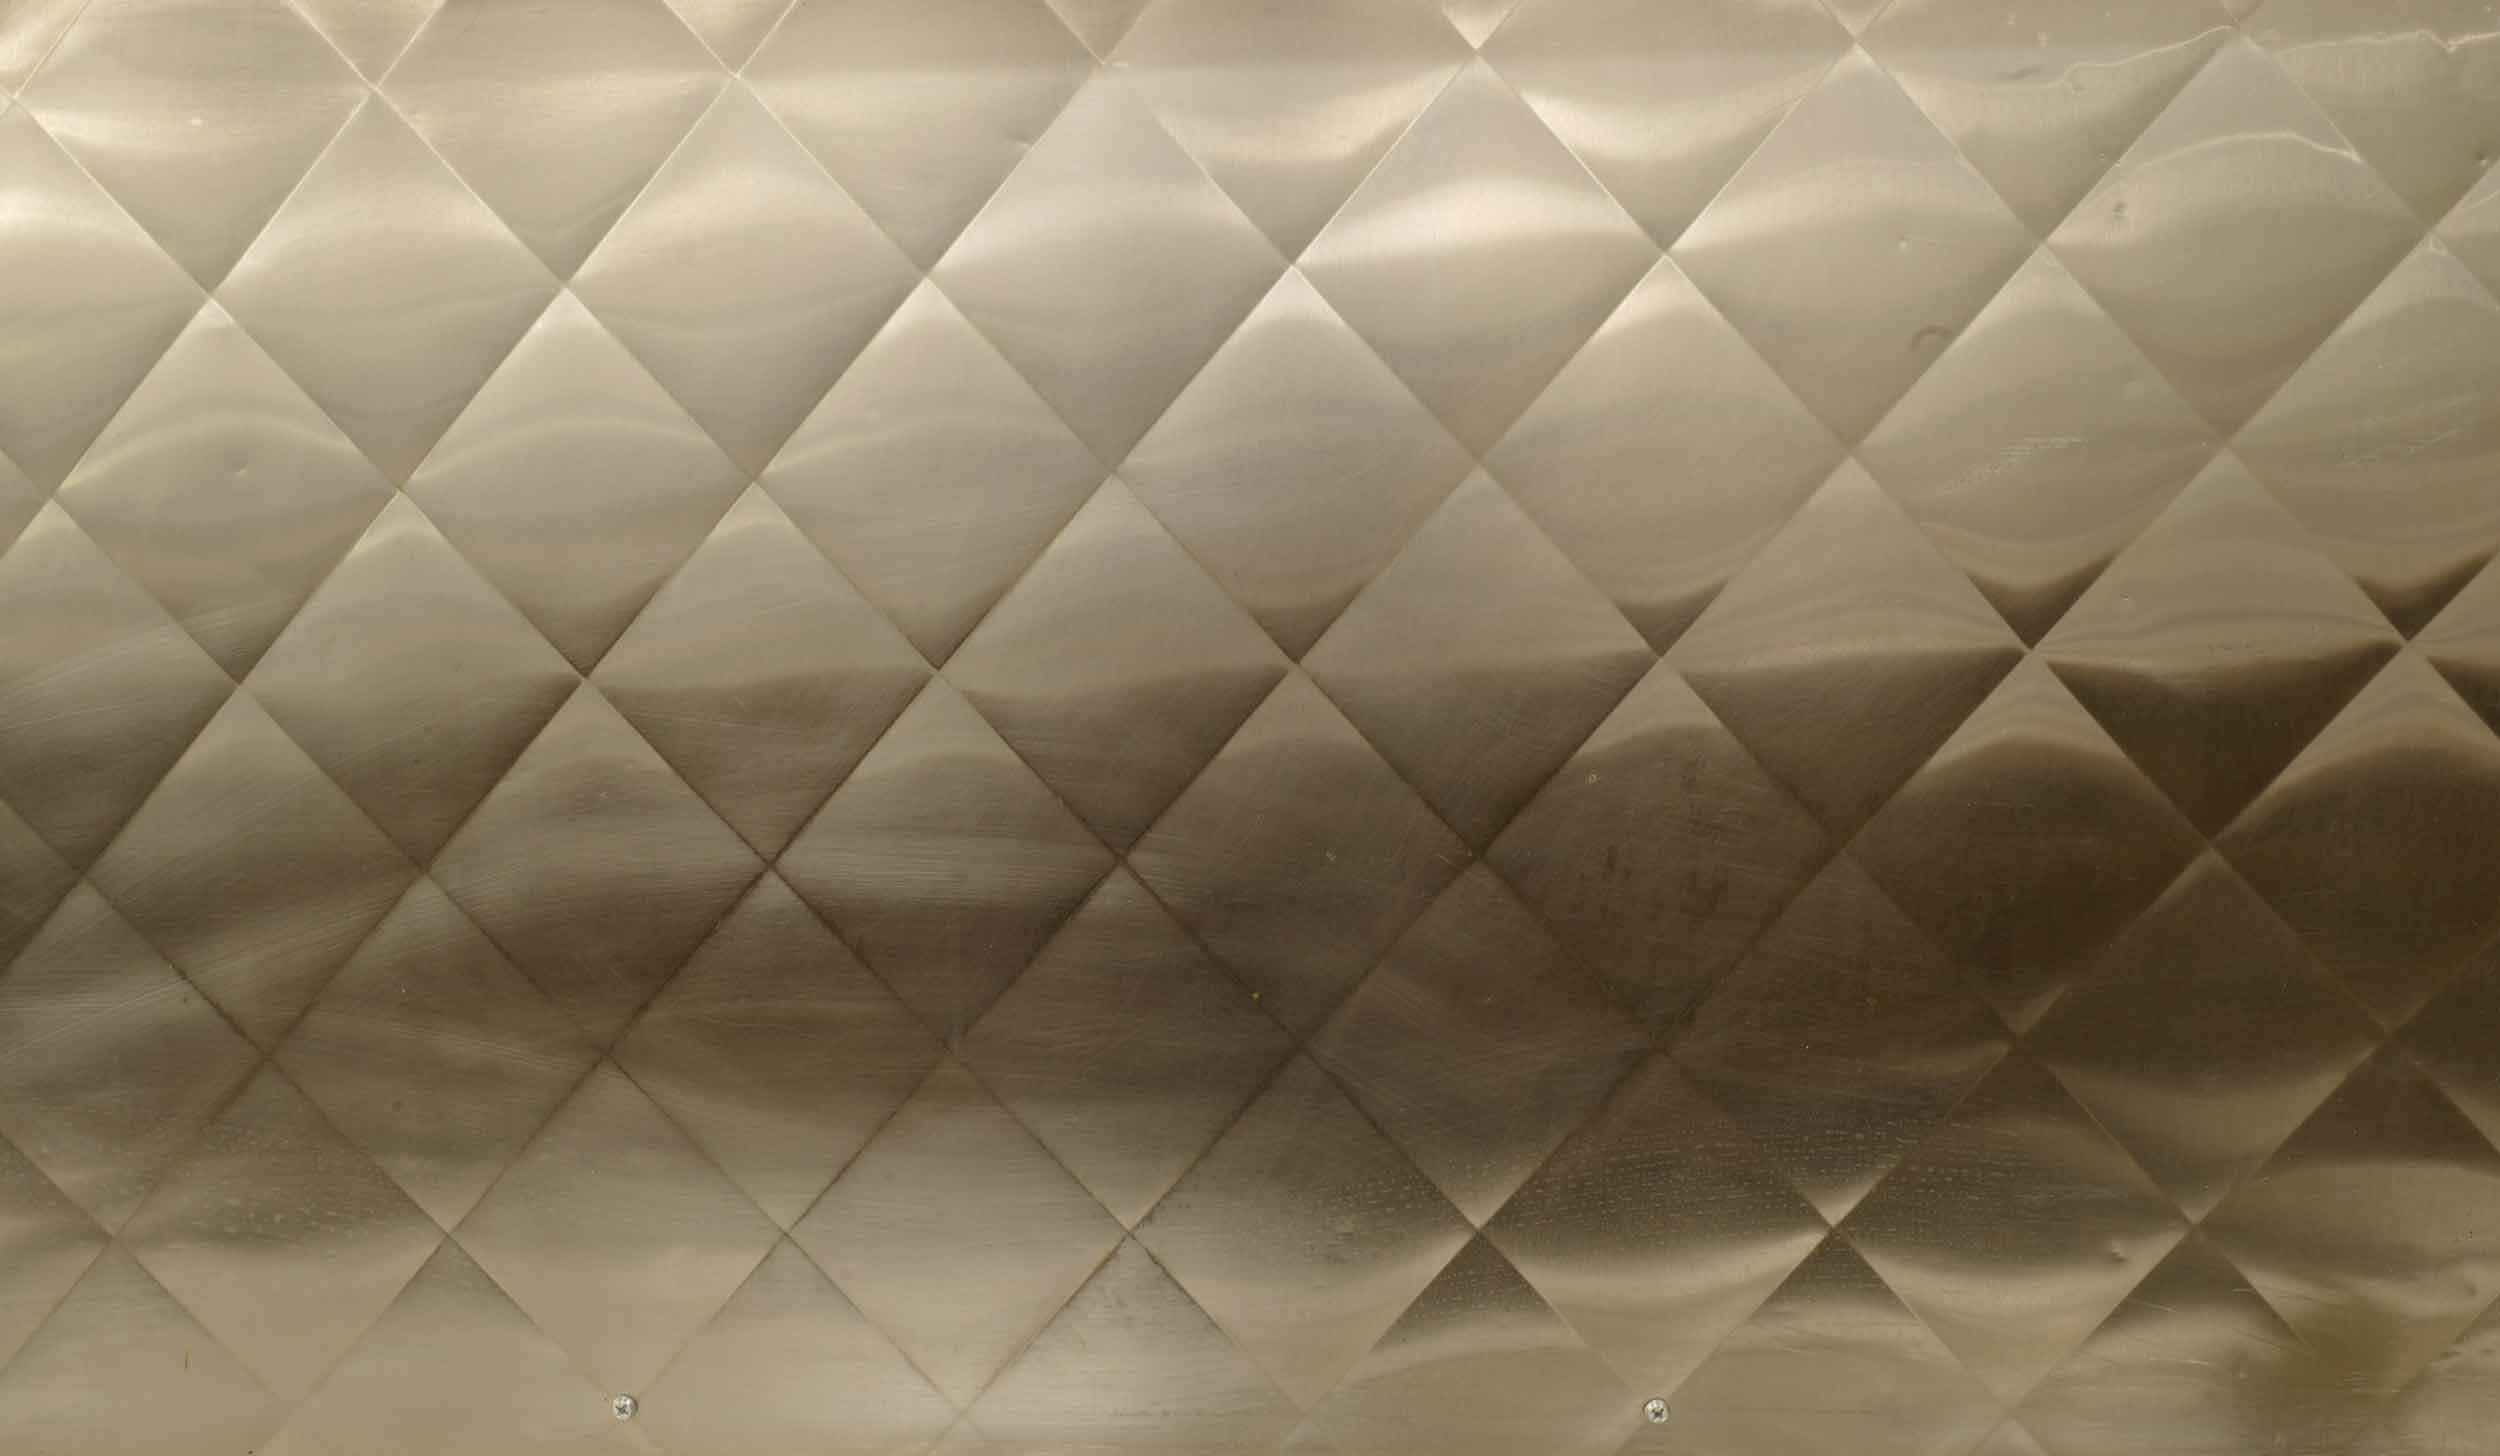 Commercial kitchen backsplash made of steel, pressed in a diamond pattern